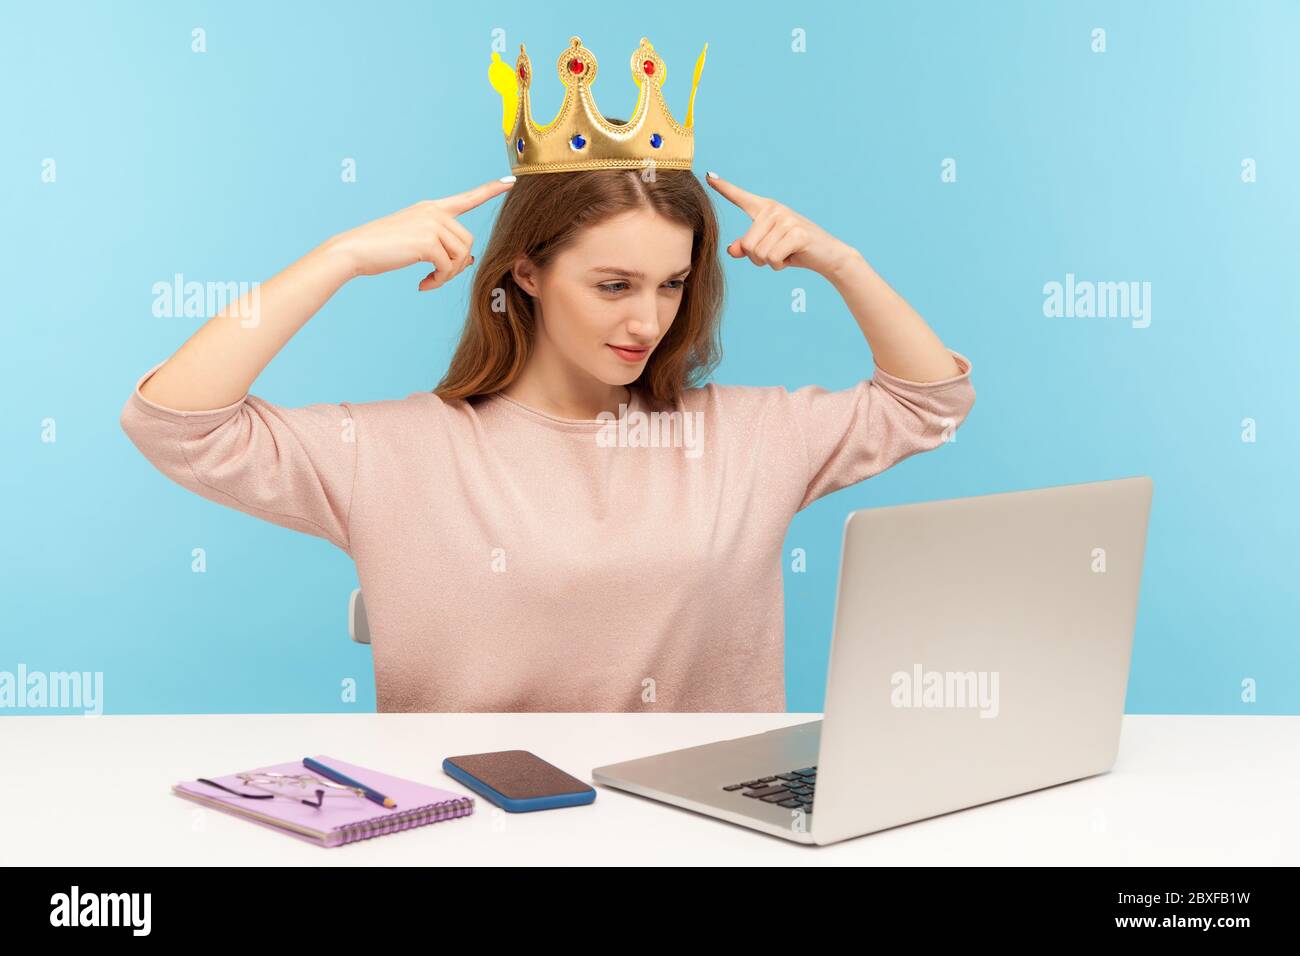 Look, I am the best! Proud egoistic narcissistic woman pointing crown on head and talking on video call laptop screen, expressing over-inflated ego. i Stock Photo